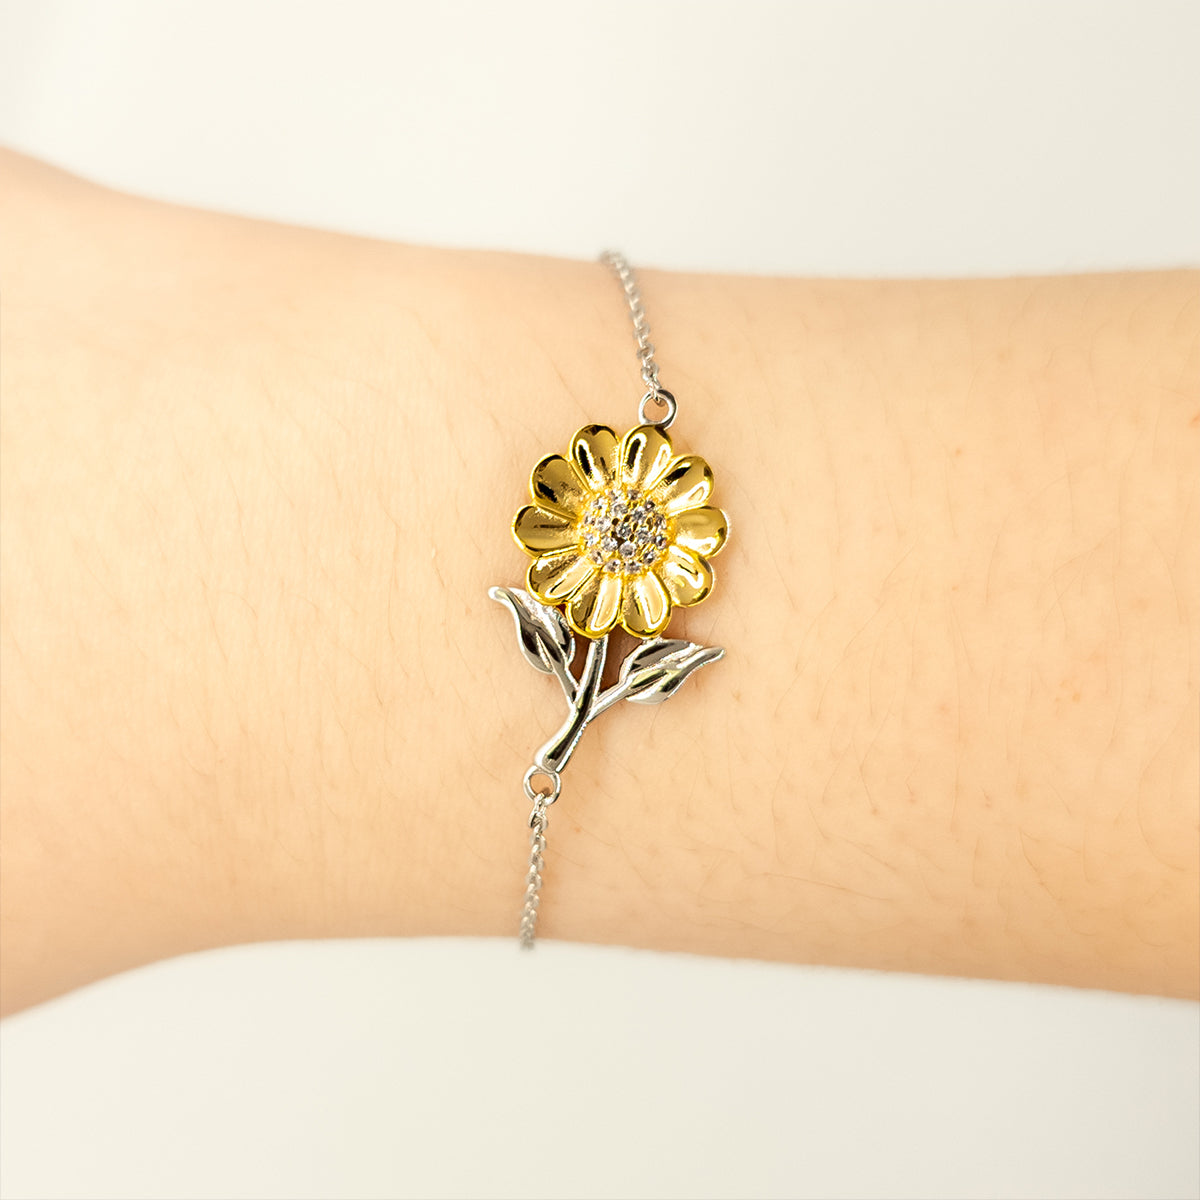 Funny Hairstylist Mom Gifts, The best kind of MOM raises Hairstylist, Birthday, Mother's Day, Cute Sunflower Bracelet for Hairstylist Mom